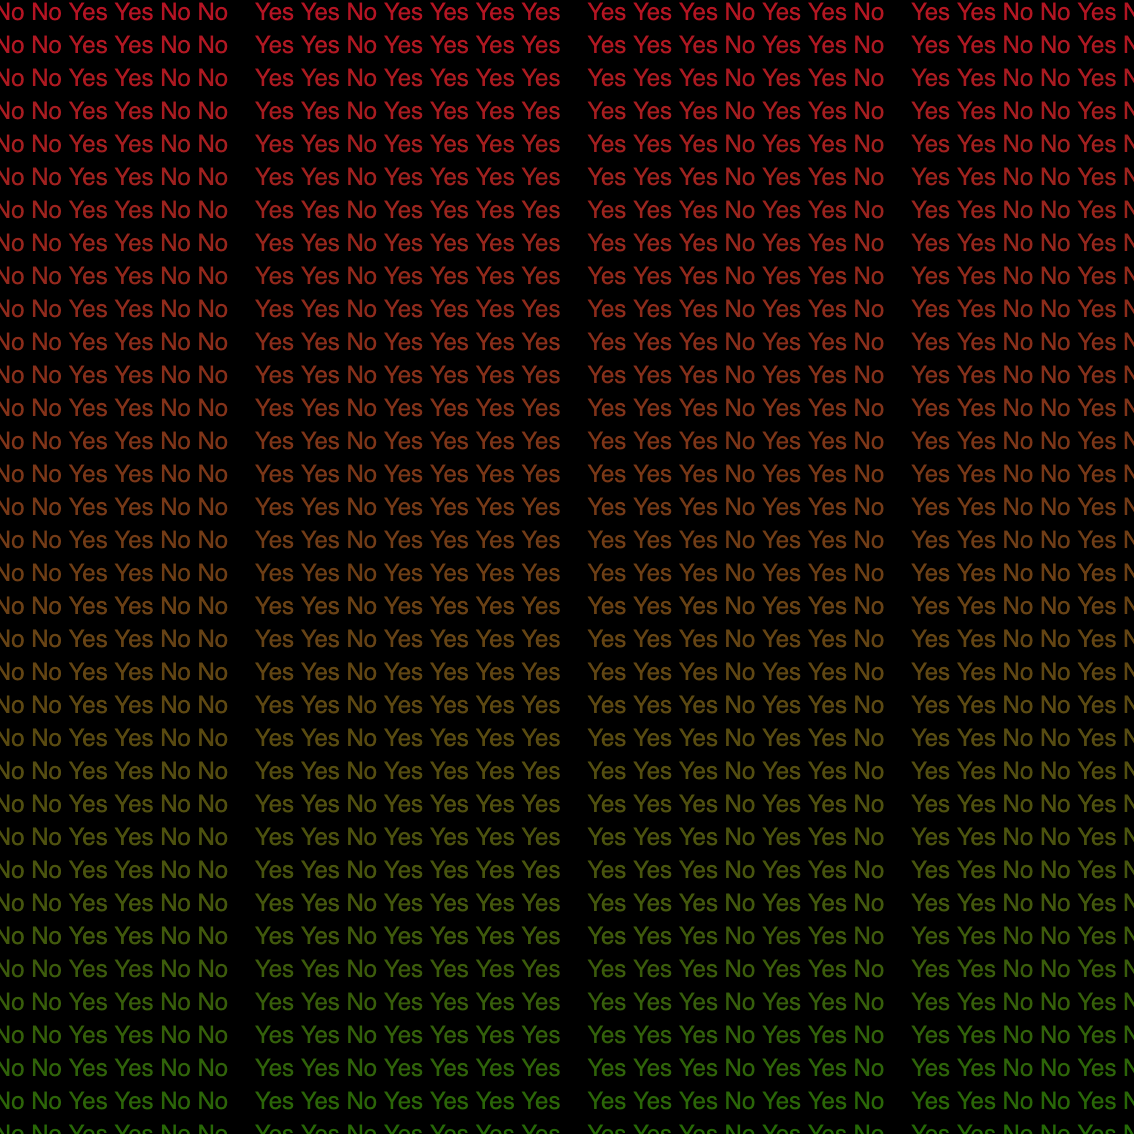 A series of "Yes" and "No" repeat hundreds of times. The font transitions from red to green in a gradient. The background is dark black.